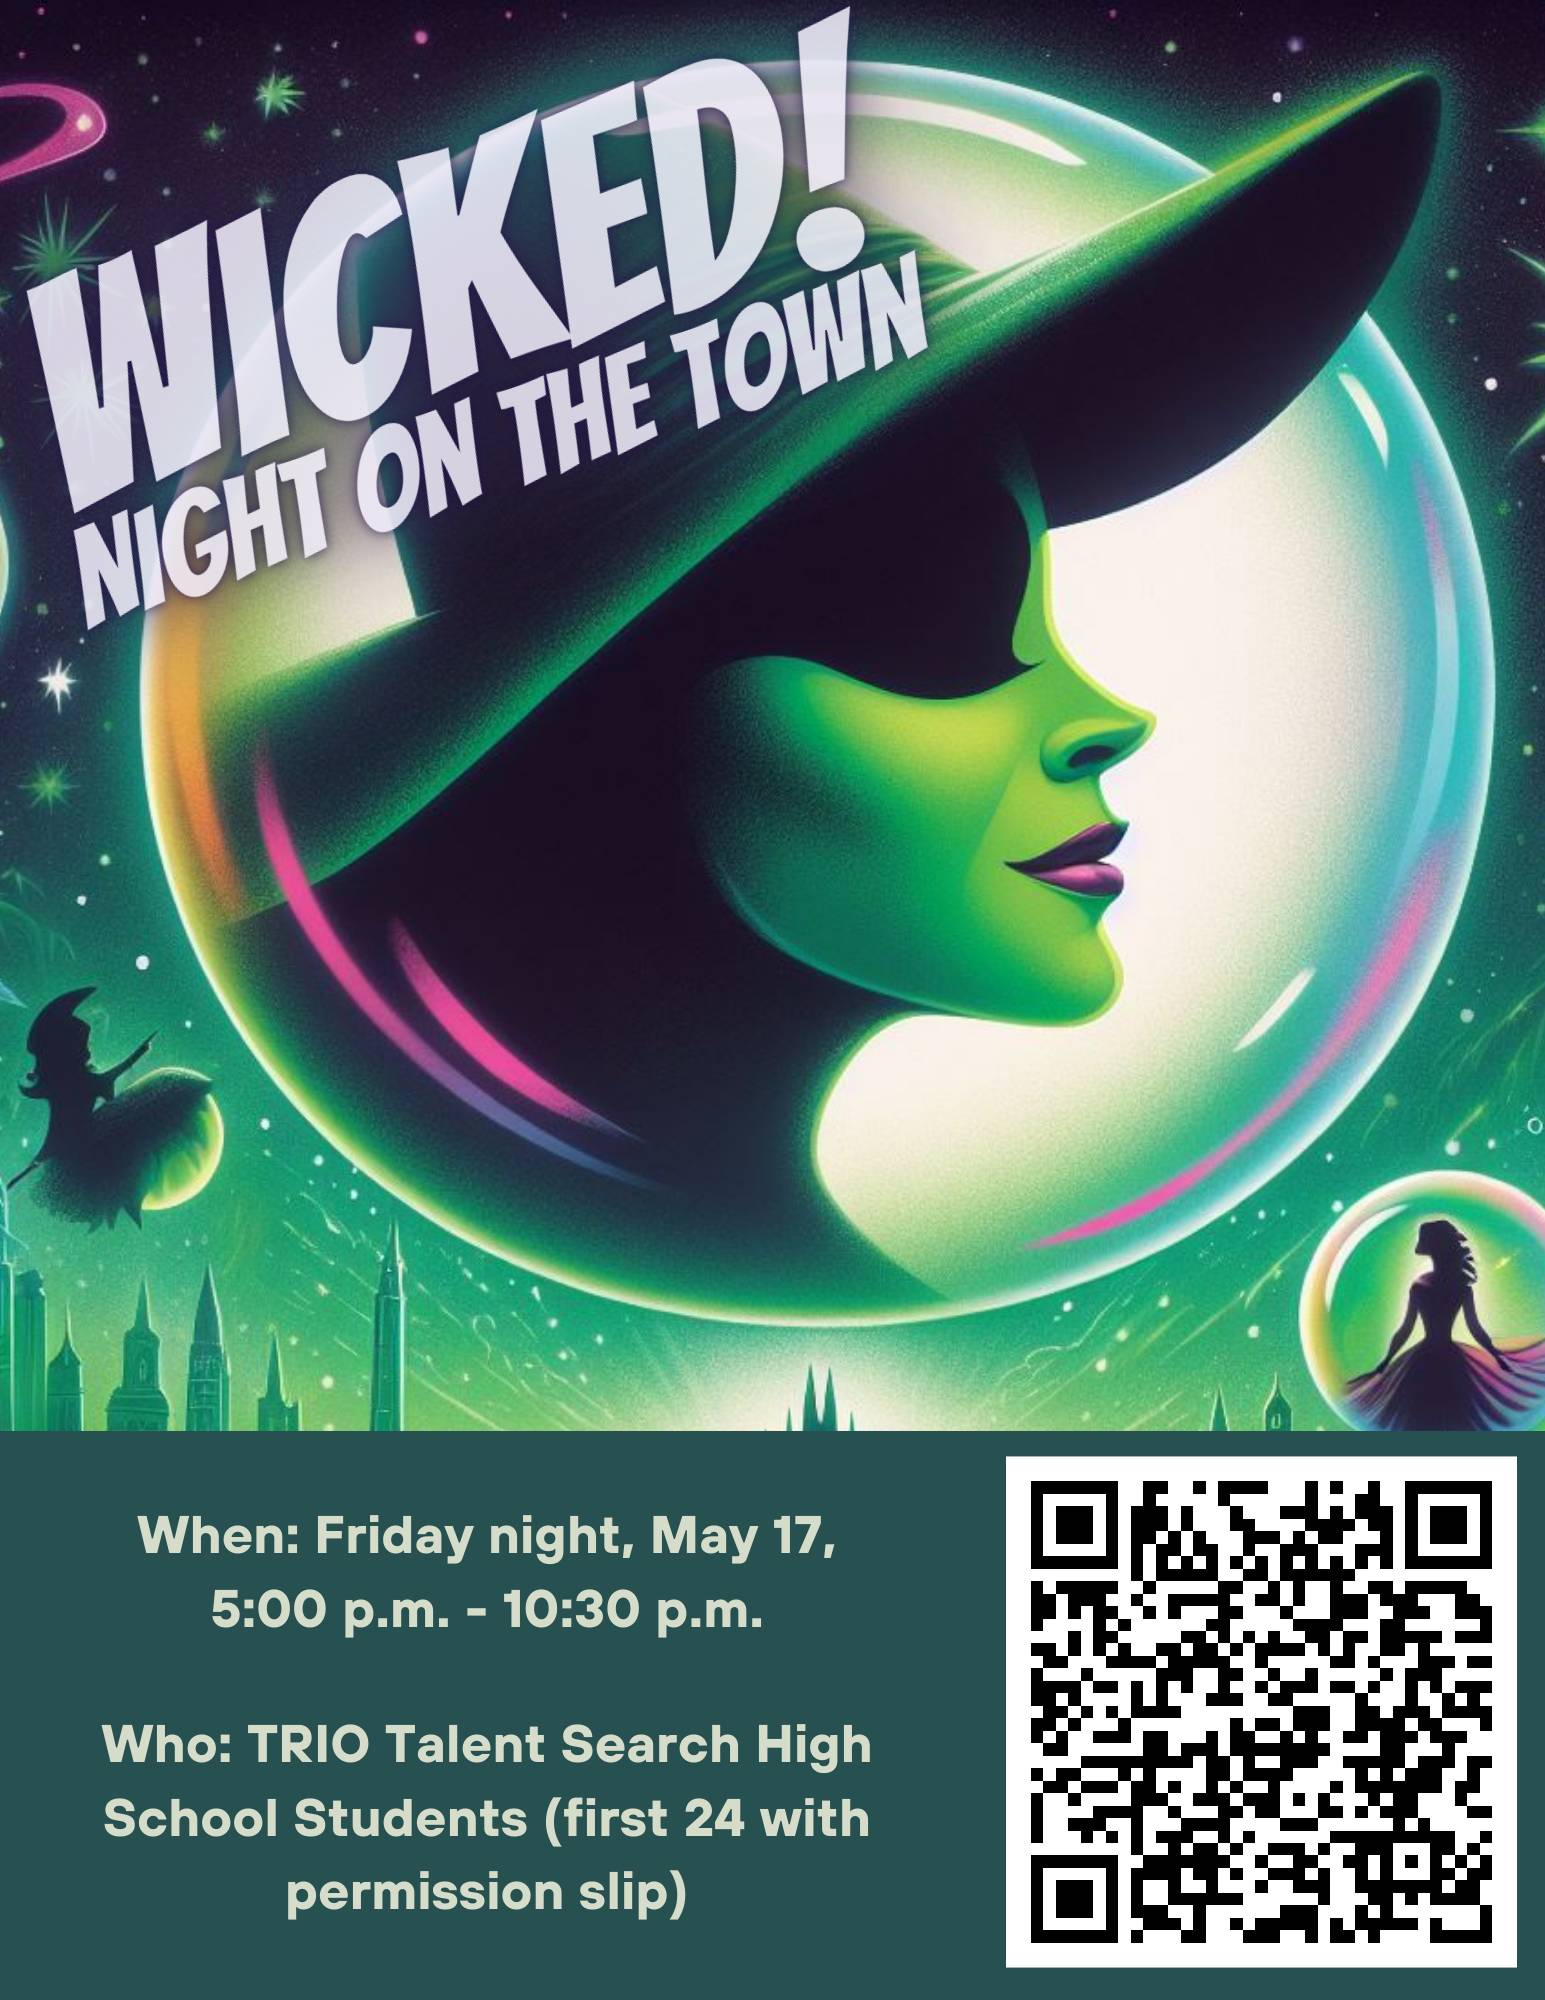 TRIO ETS Night on the Town flyer, featuring the witch from the Broadway show "Wicked"